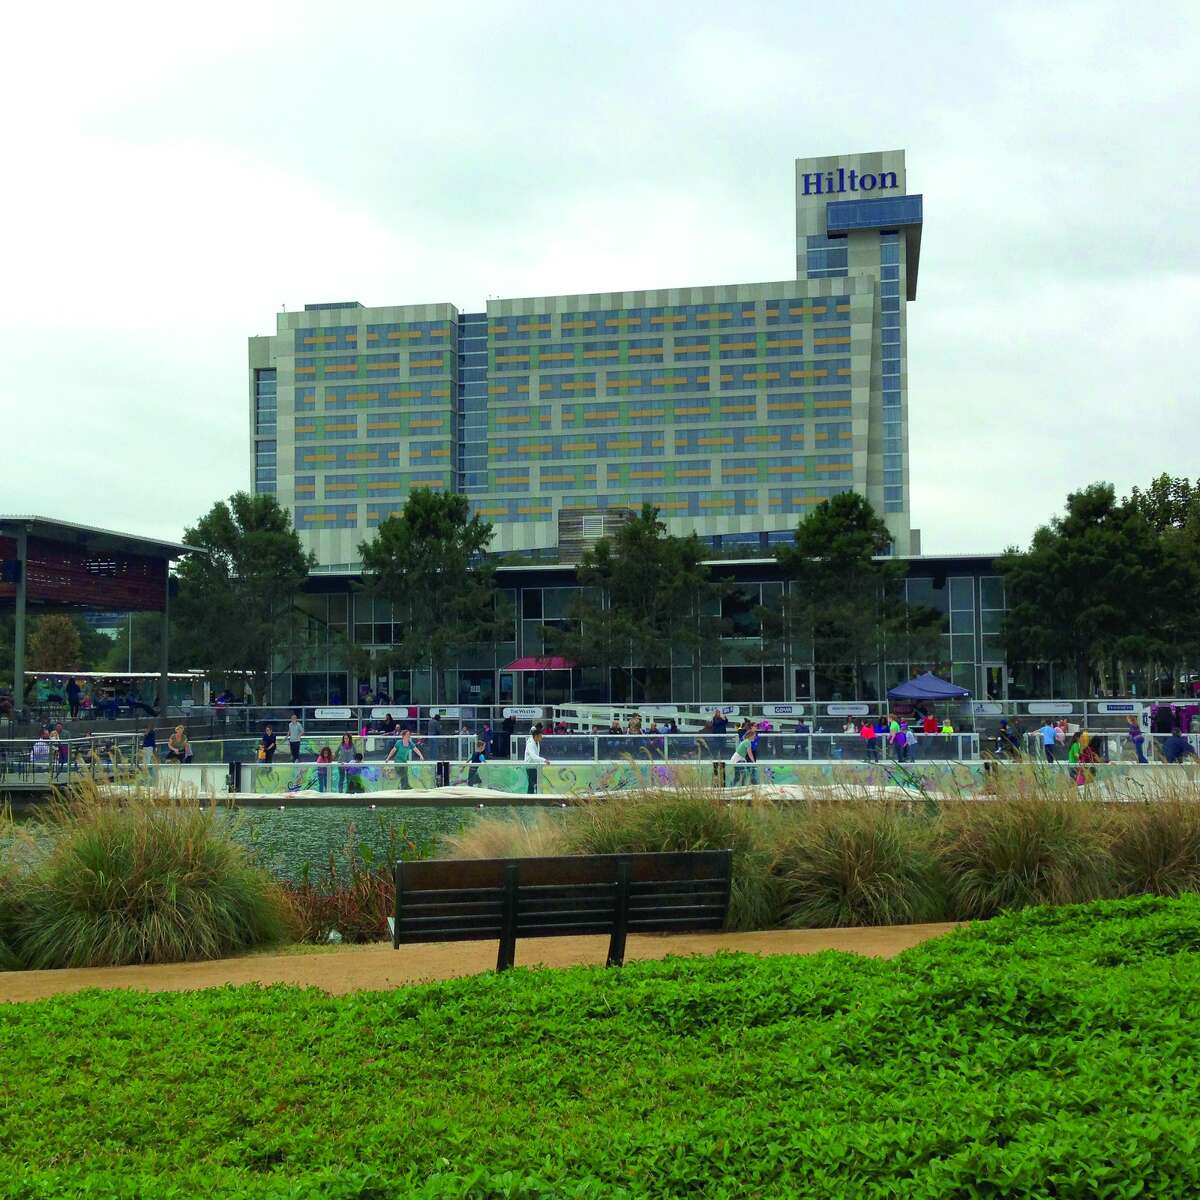 The 1,207-room Hilton opened in 2003.